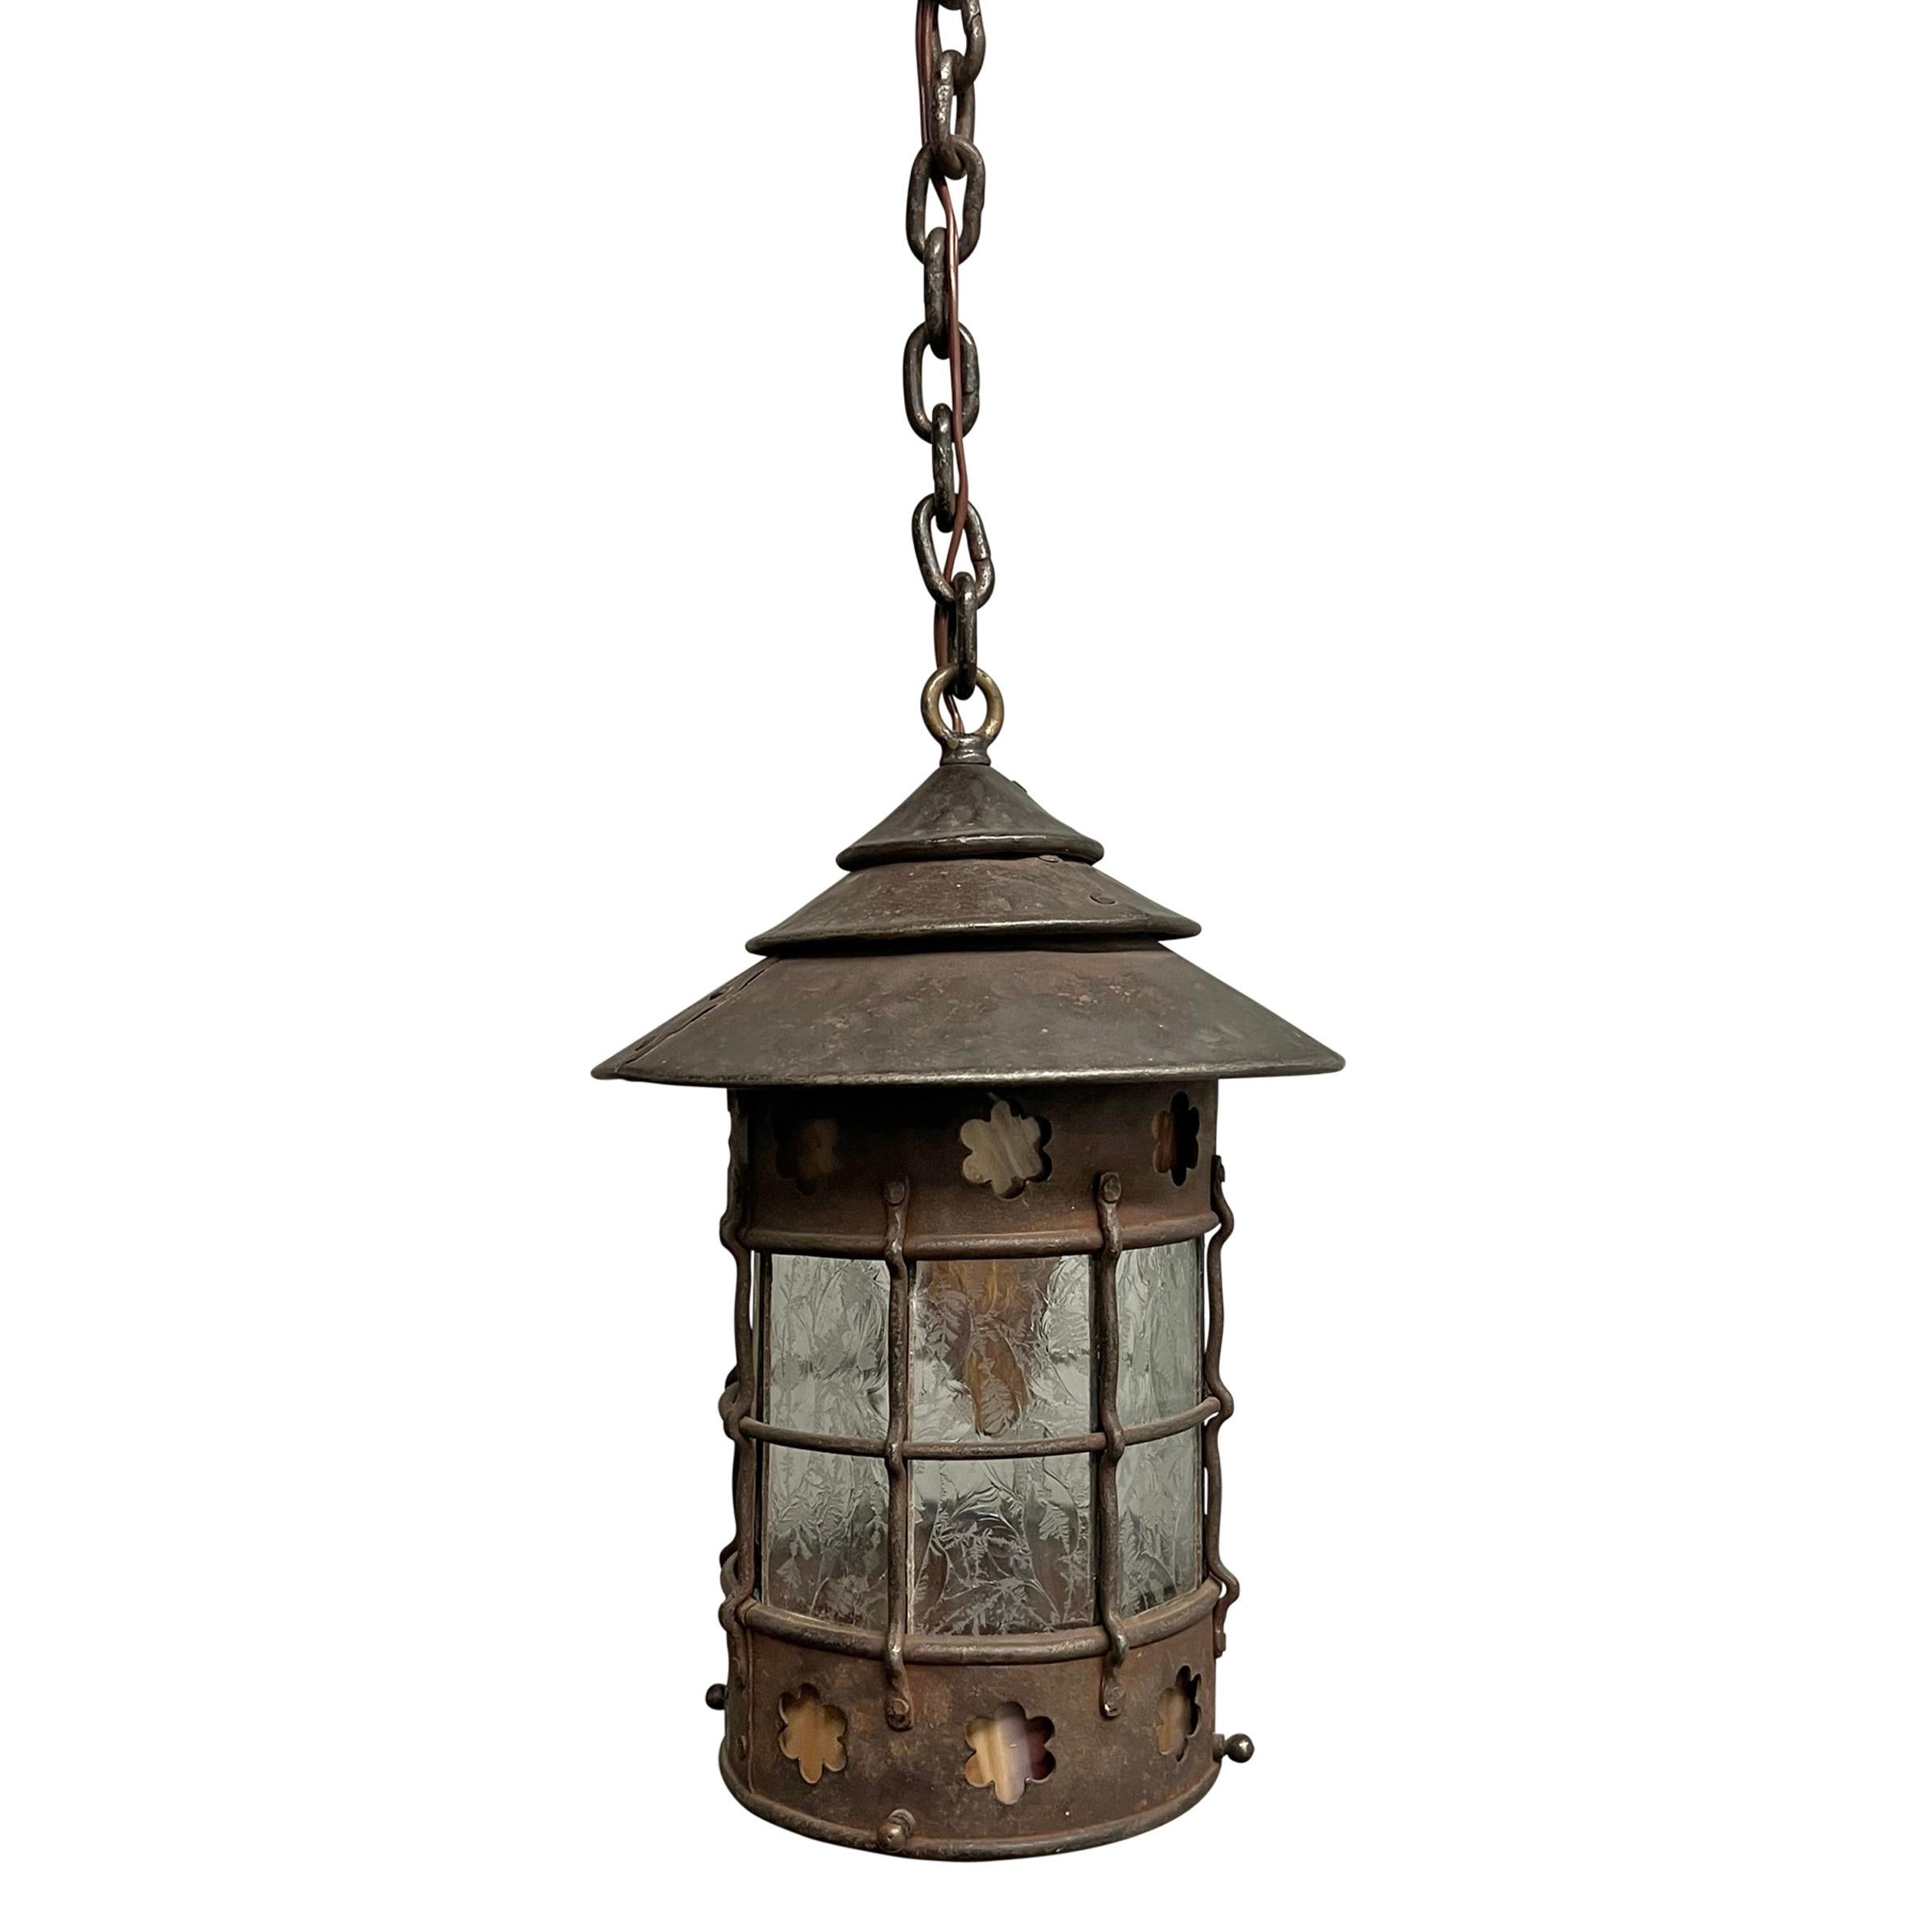 Arts and Crafts Early 20th Century American Hand-Wrought Iron Lantern